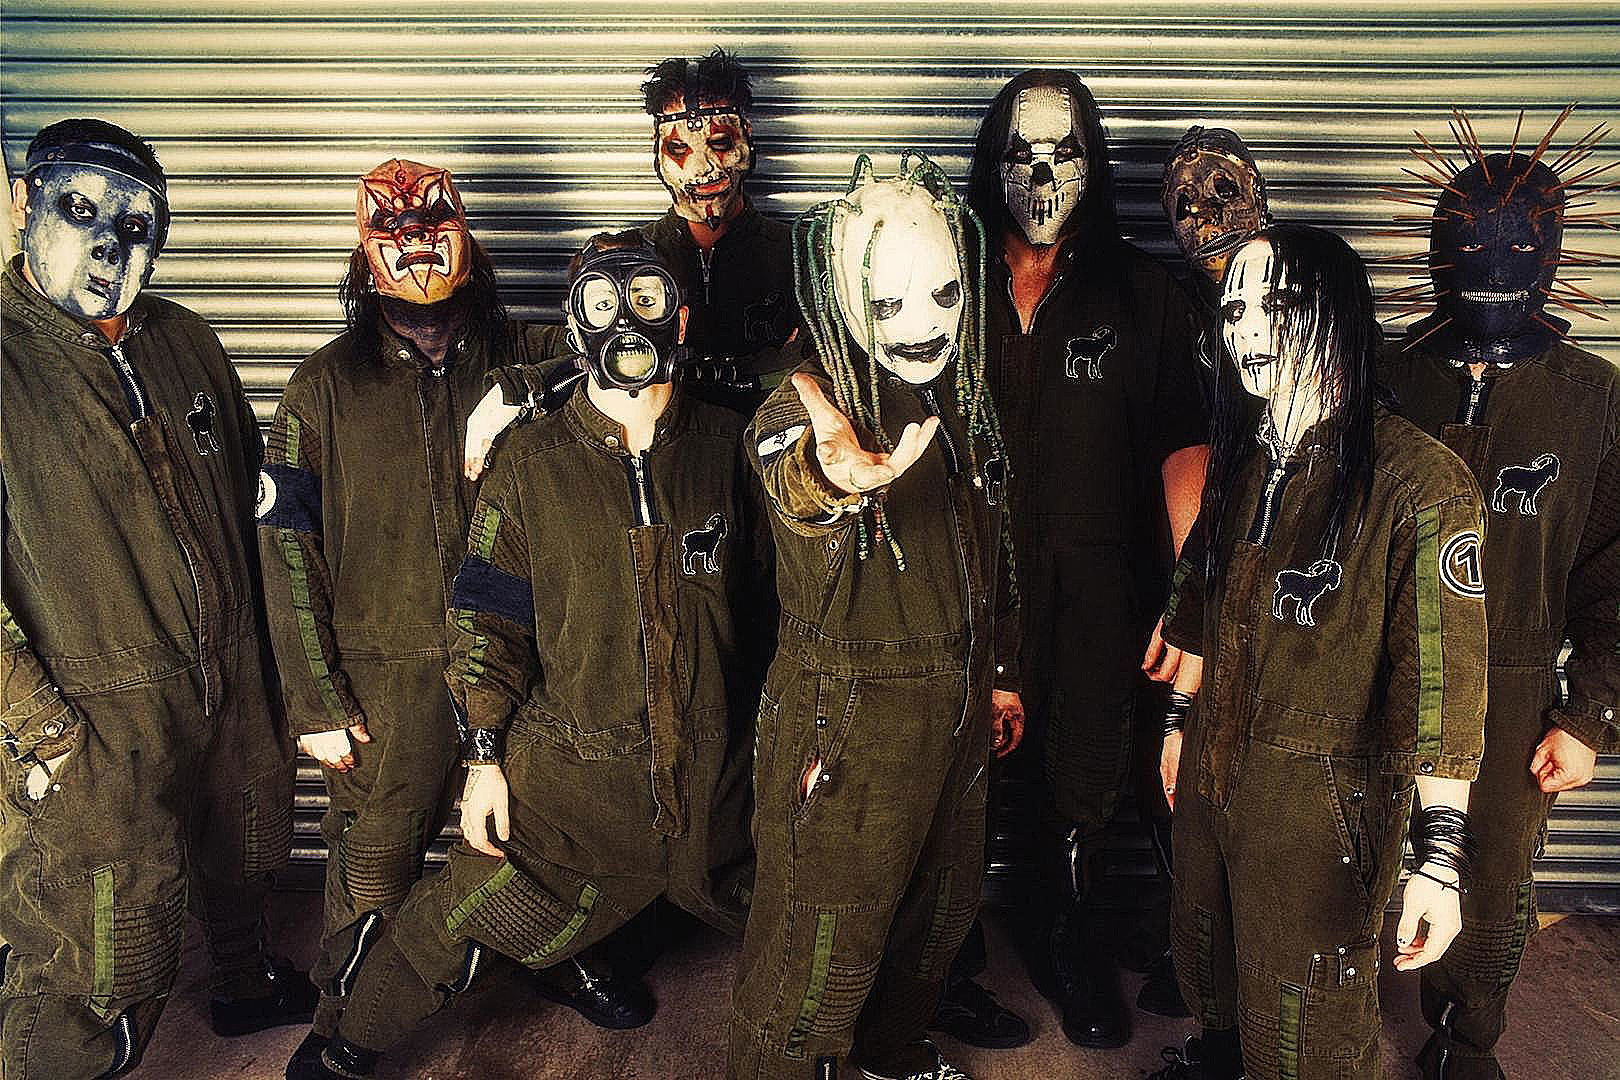 Shawn 'Clown' Crahan: Slipknot 'Hated Other' 'Iowa'